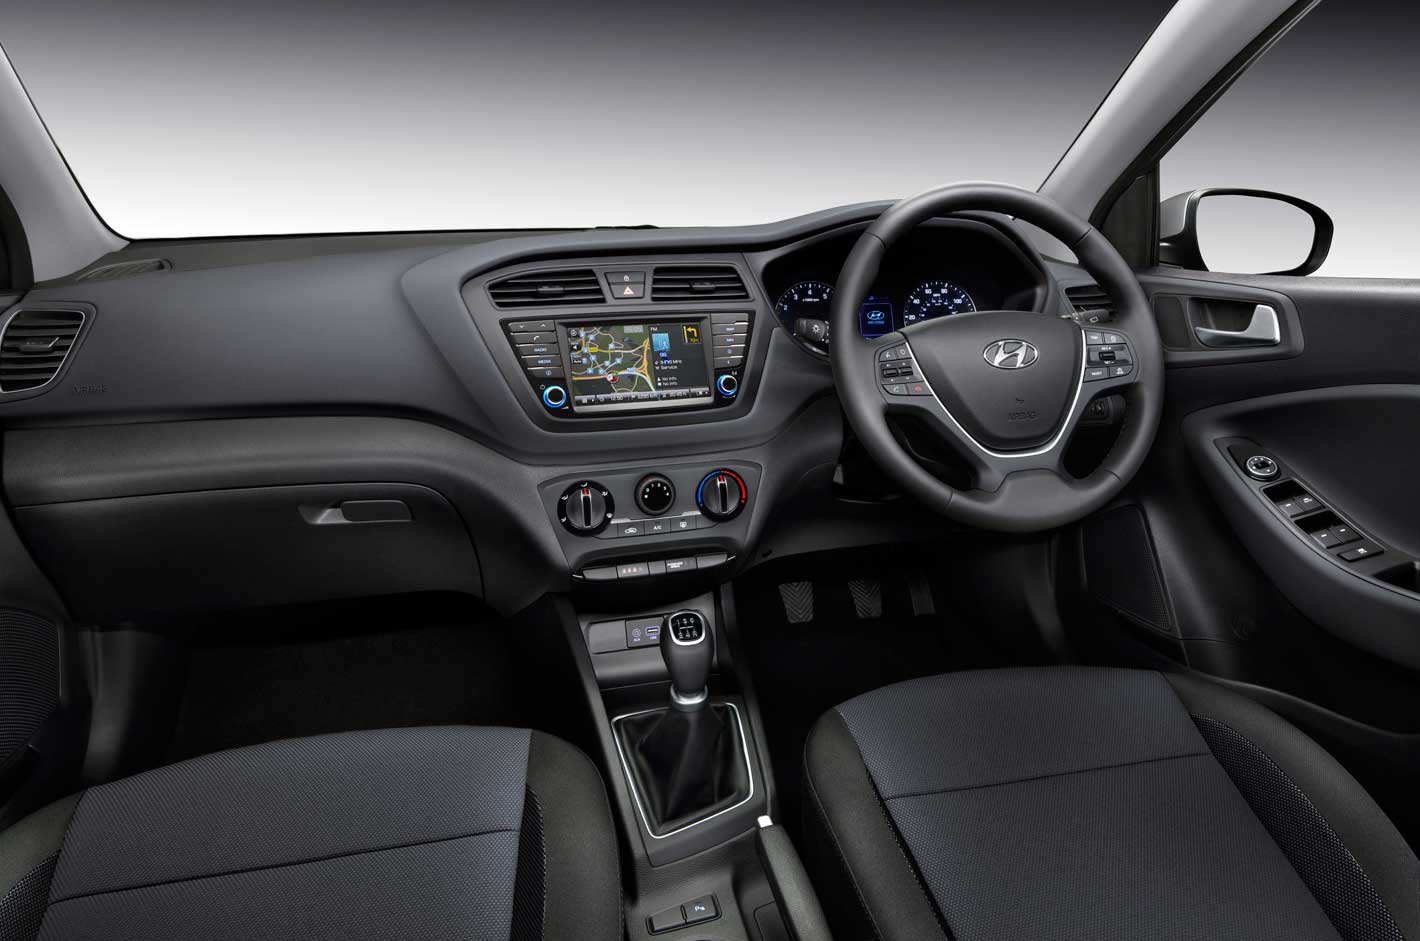 Hyundai releases interior image of the all-new i20